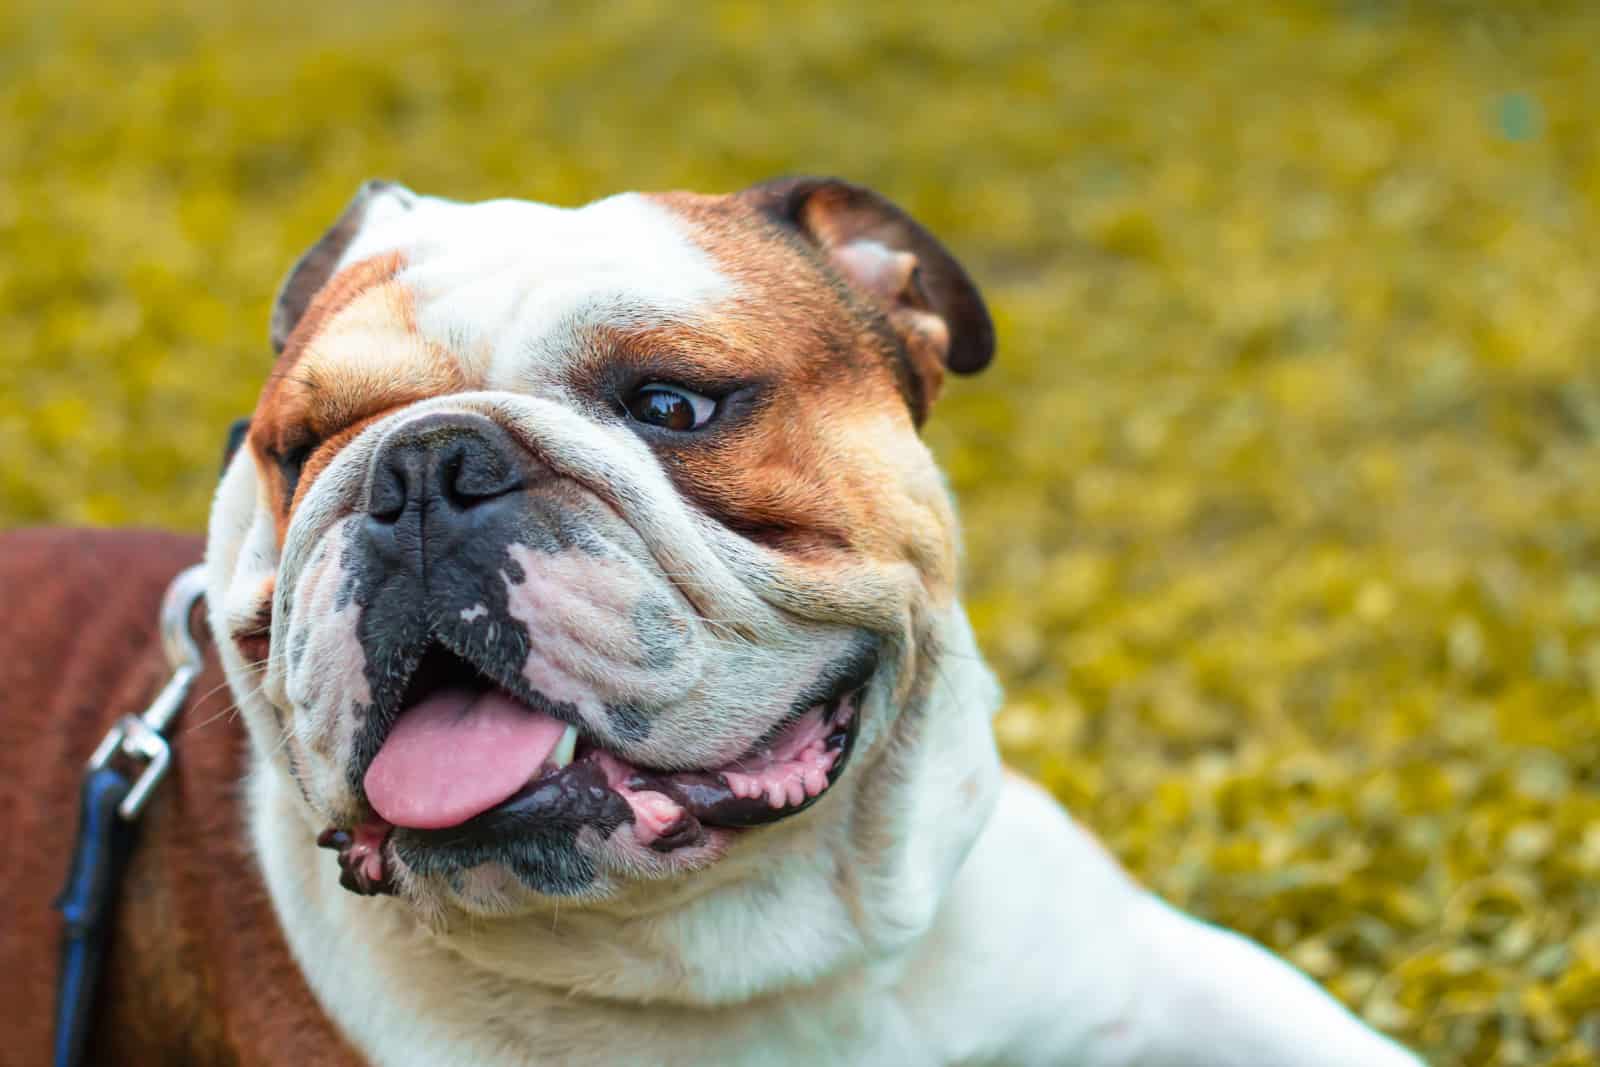 Close up view of a cute English Bulldog Pup with wrinkled face smiling.